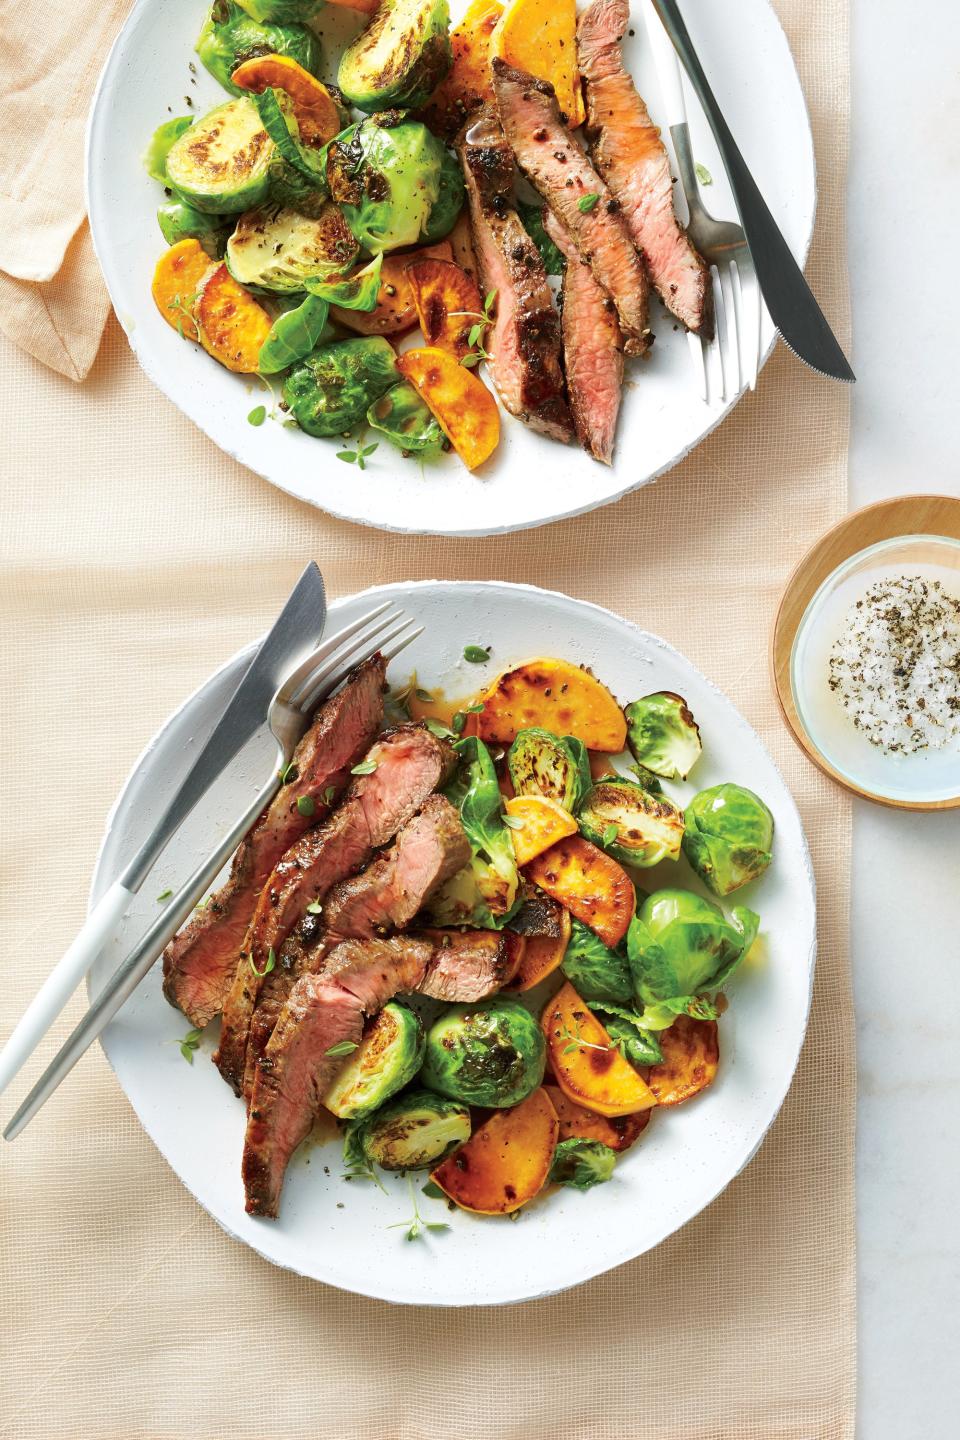 Broiled Flat Iron Steak with Brussels Sprouts and Sweet Potatoes